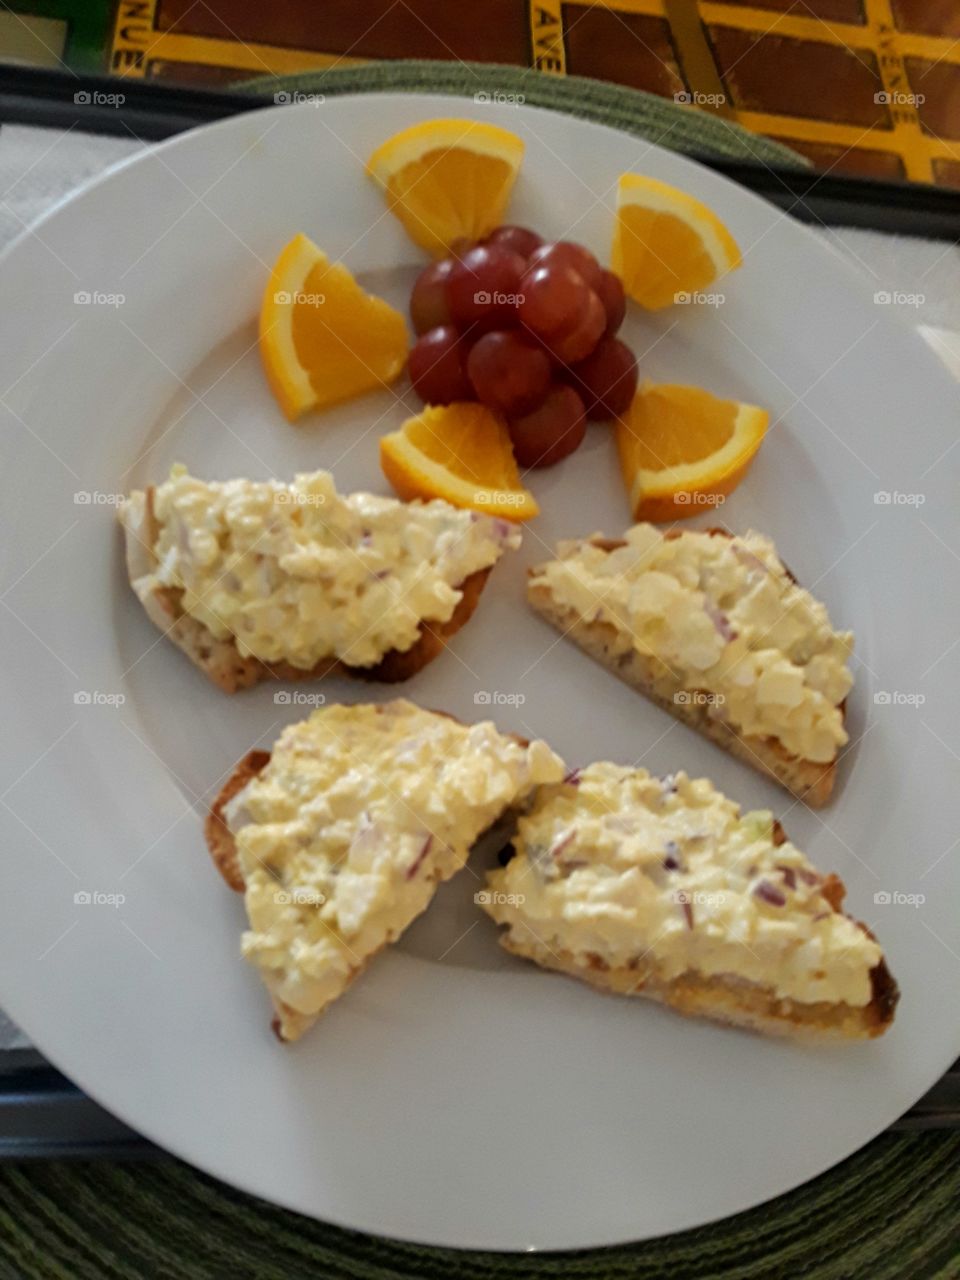 tasty egg salad in a toasted muffins